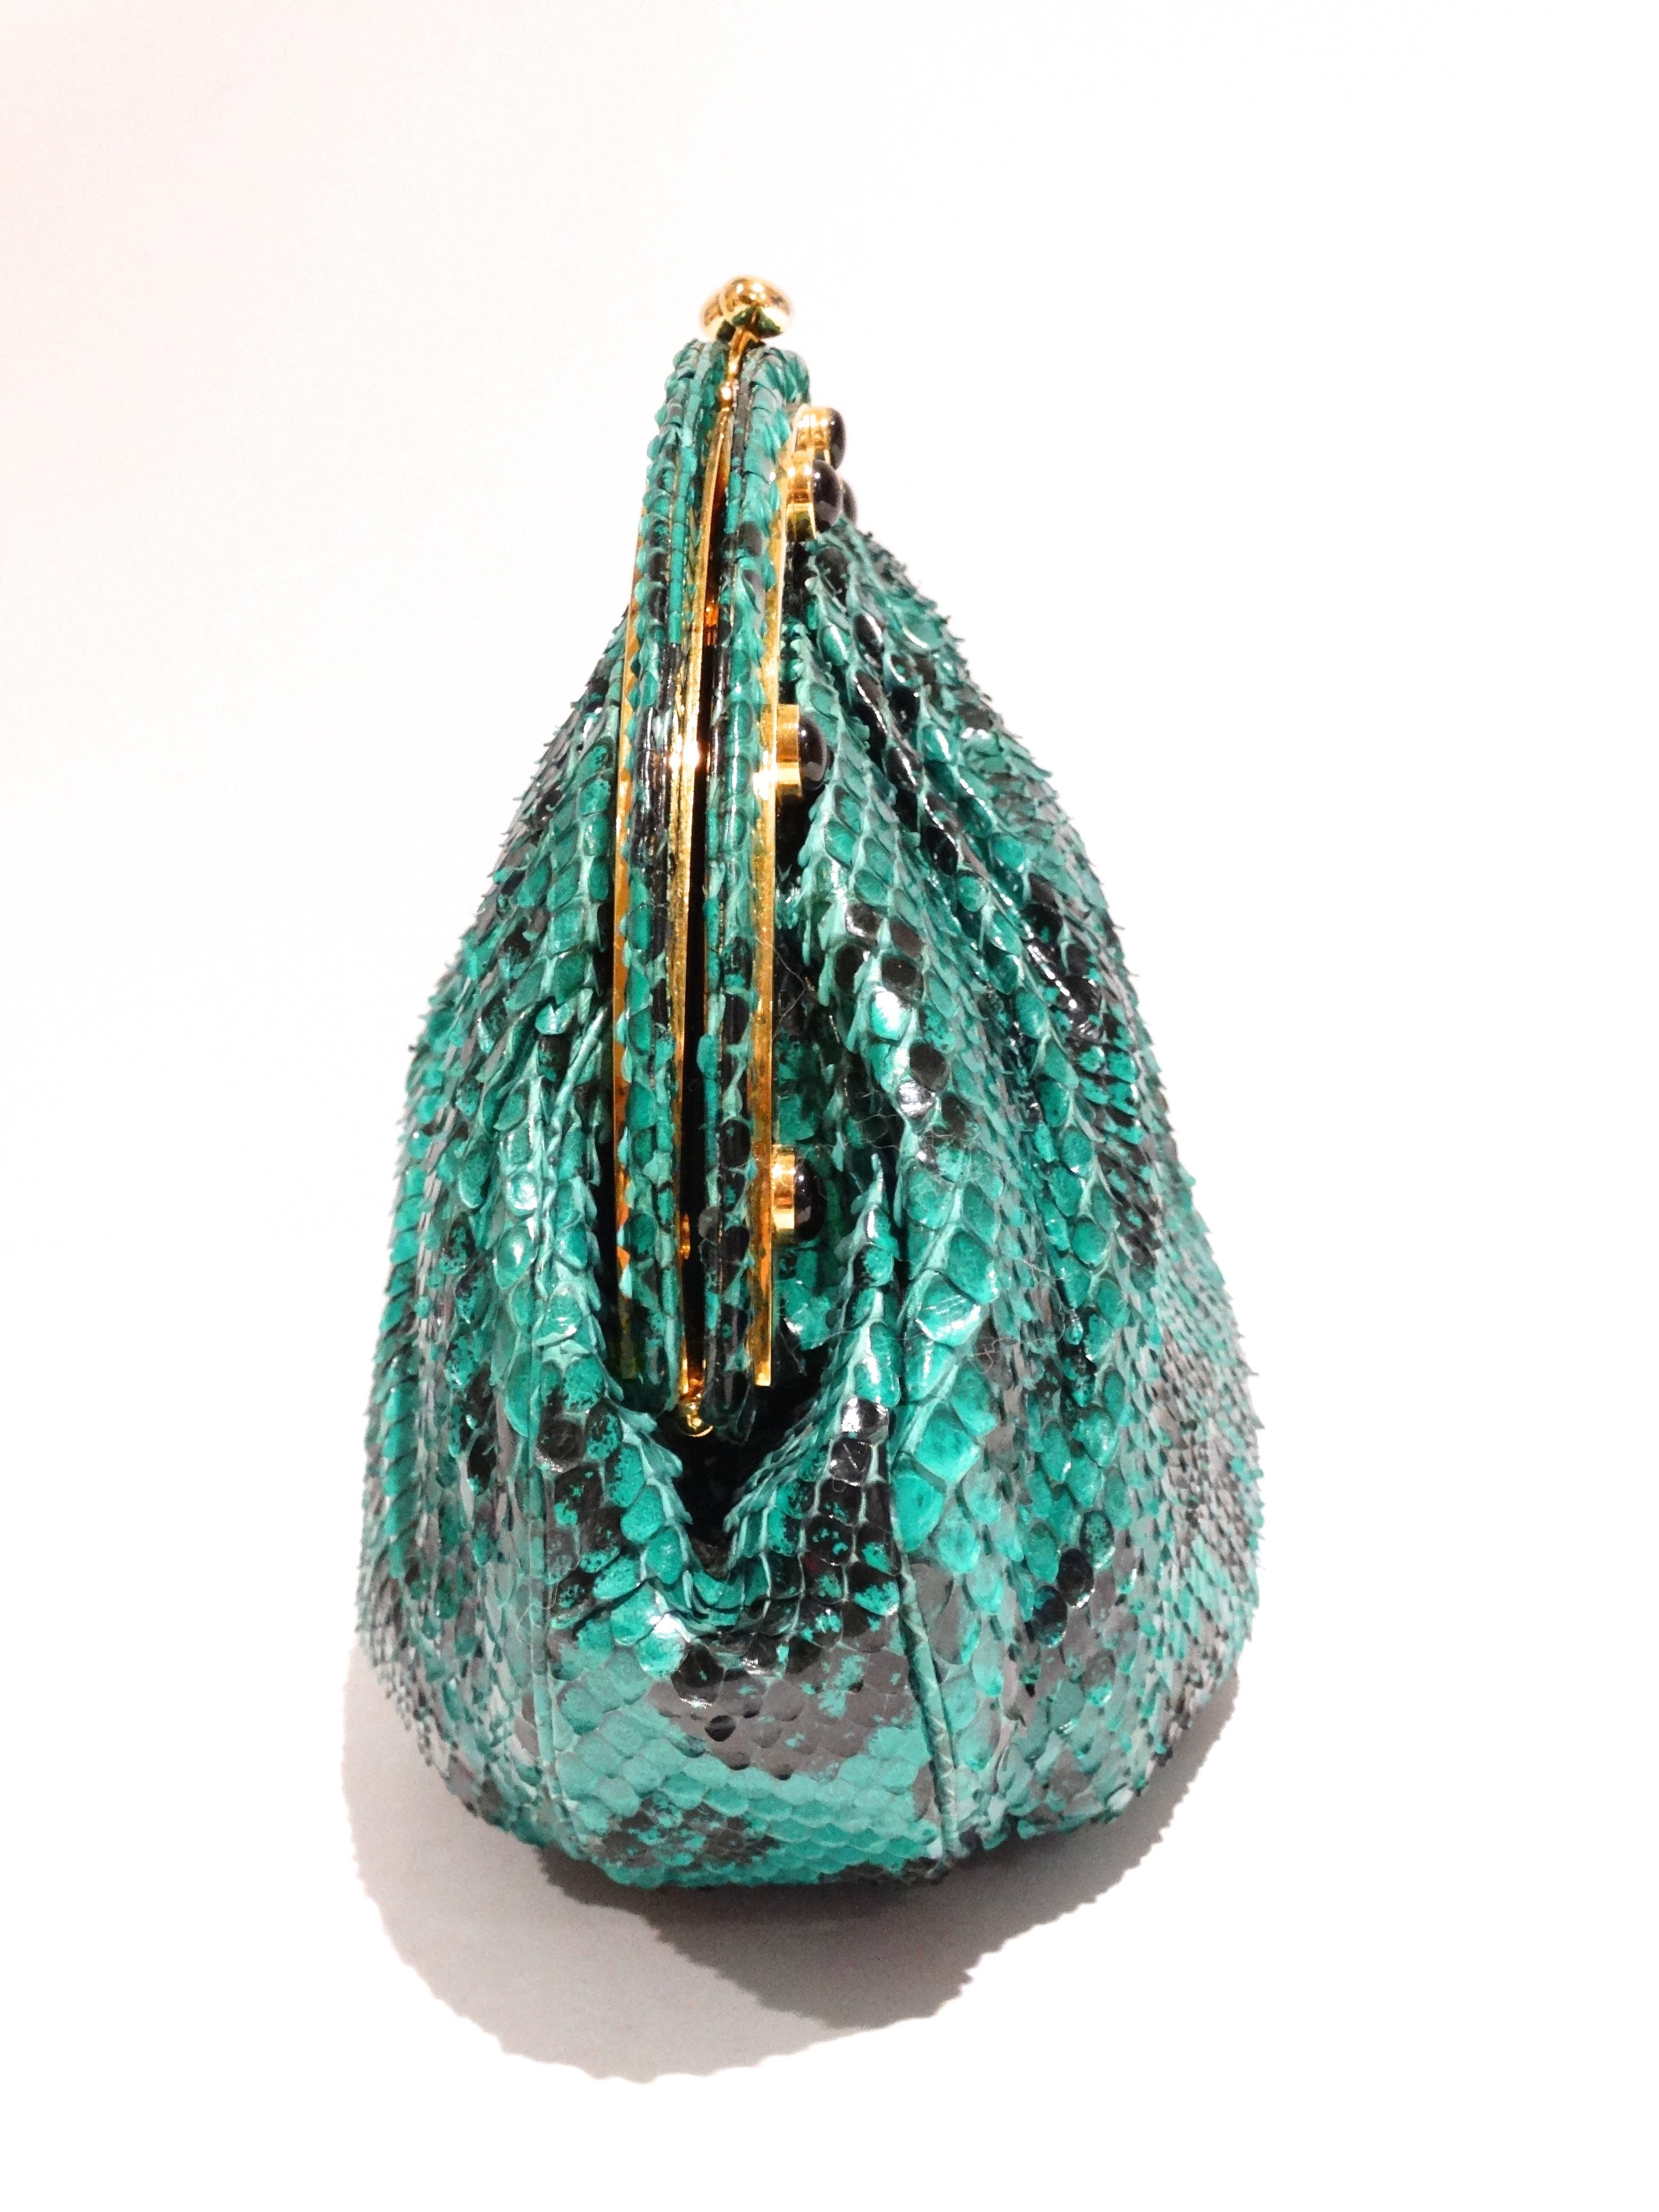 Hello Emerald Gem.. this is an Amazing 1980's Judith Leiber for Neiman Marcus snakeskin bag in emerald green with a black leopard print! It's a show stopper, a truly  piece of art! The frame of this bag is very rare and uniquely embellished with